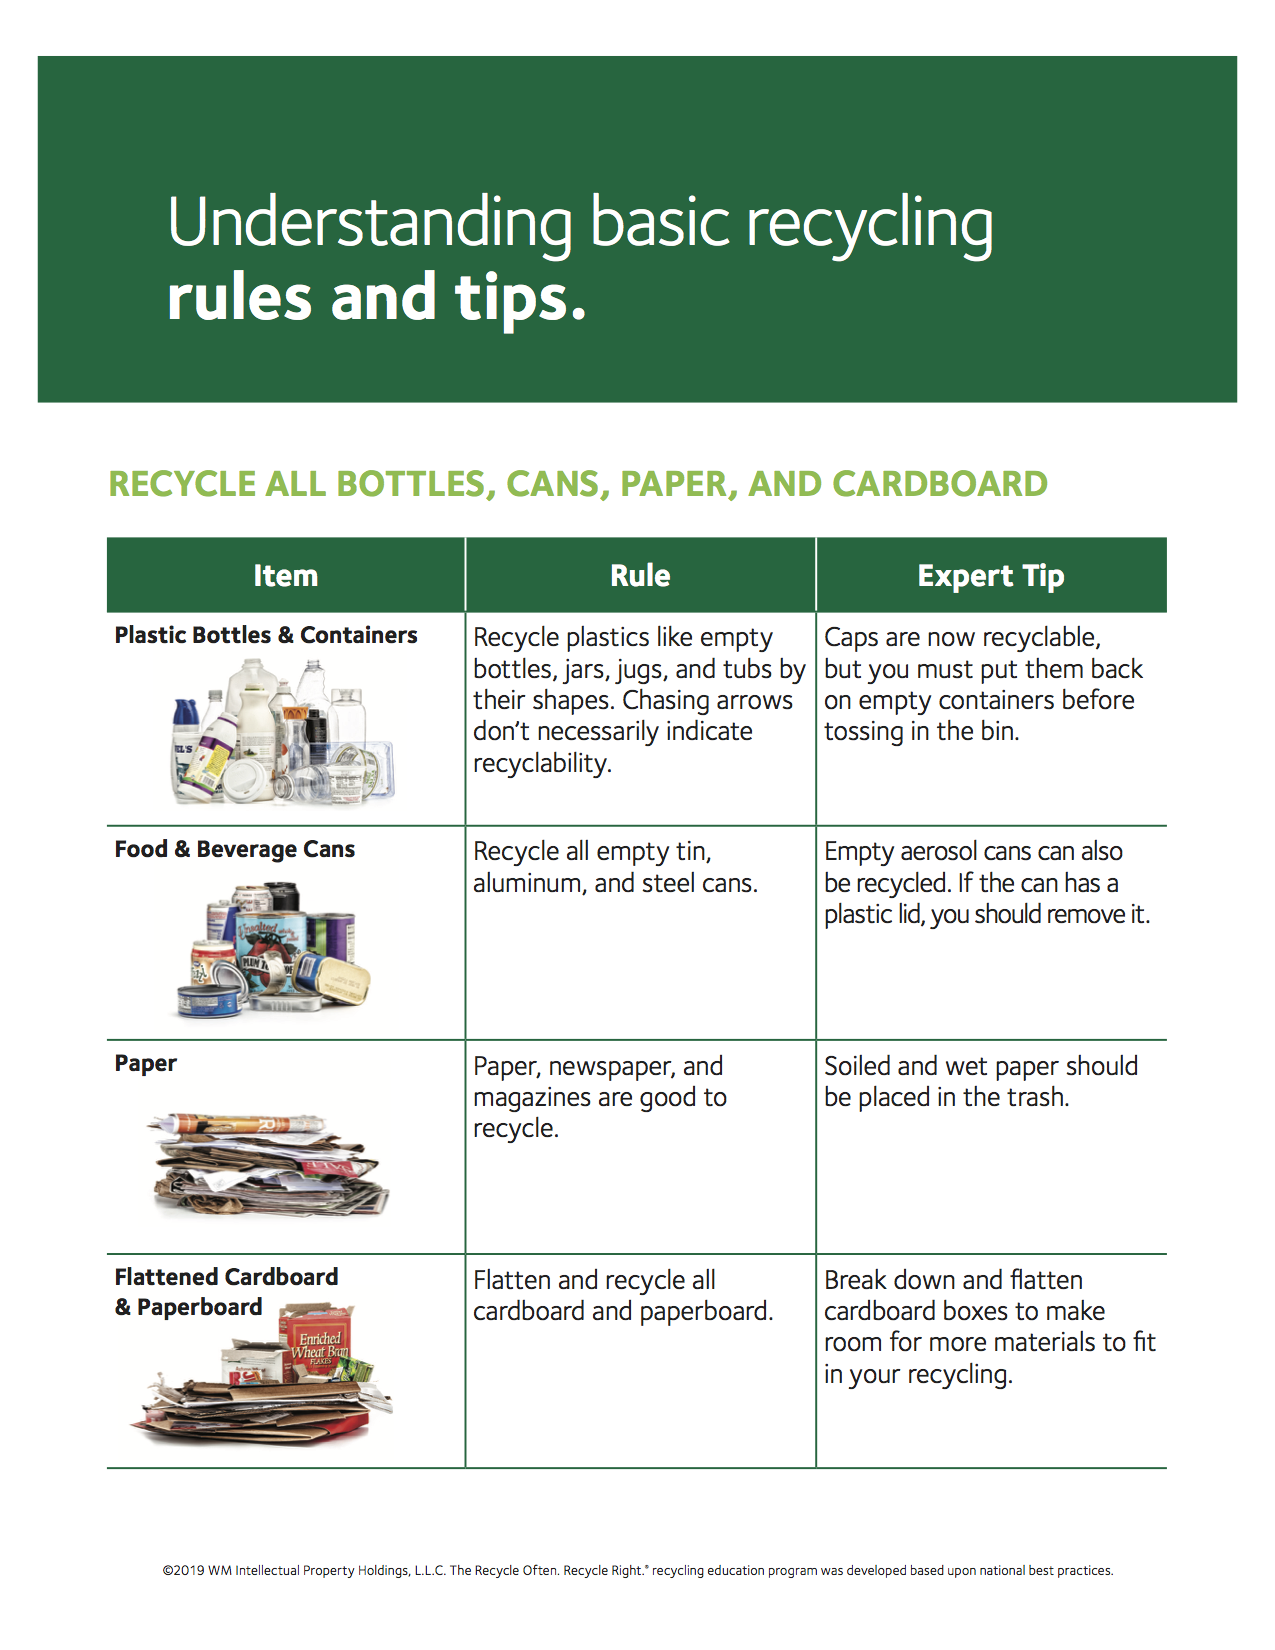 https://www.up.edu/sustainability/images/recyling-myths-2.png